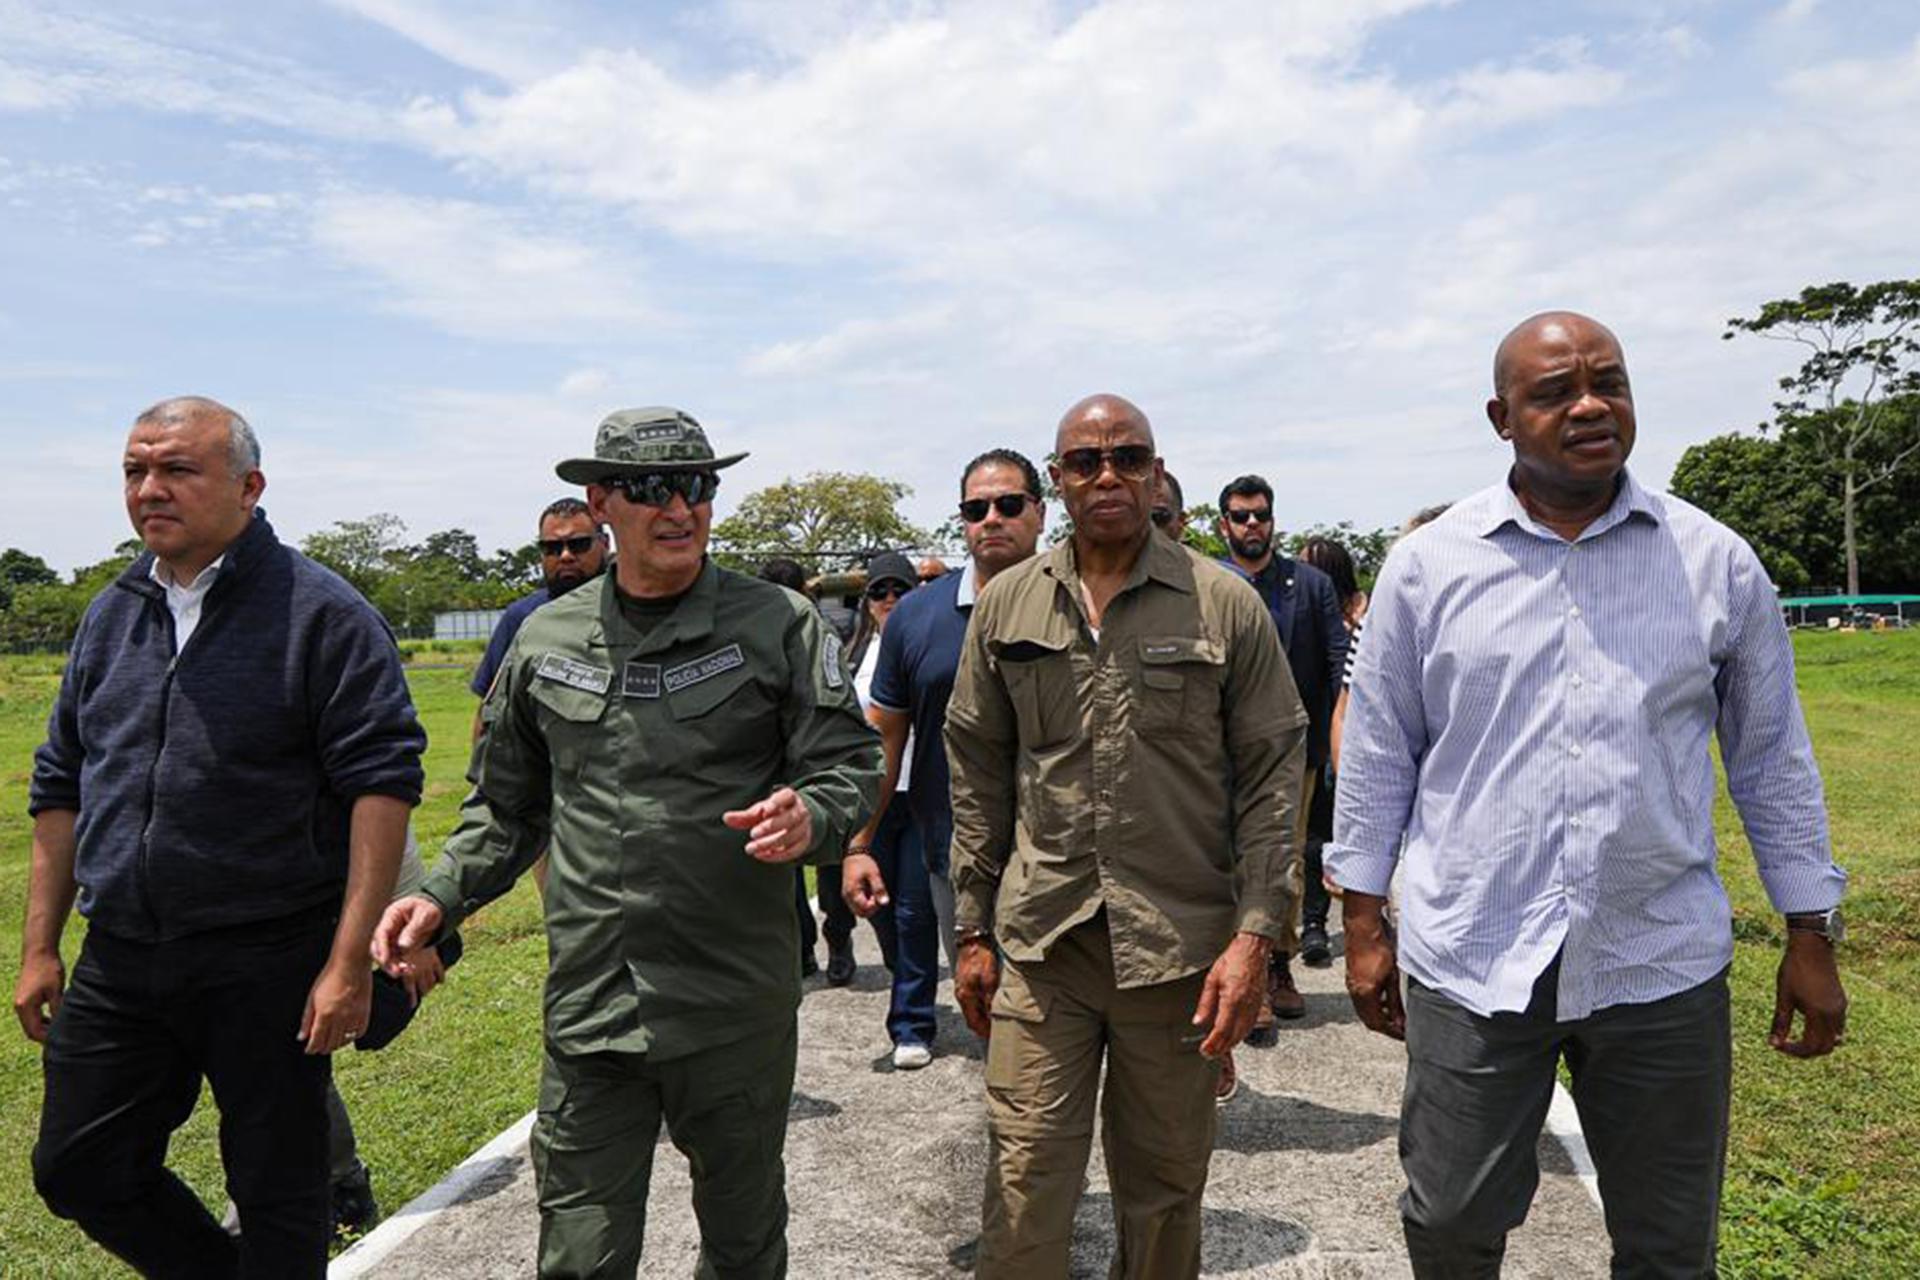 Photograph provided by the Colombian Police showing the mayor of New York, Eric Adams (2d), along with the director of the Colombian Police, General William René Salamanca (2i), and the Colombian ambassador to the United States, Luis Gilberto Murillo (d), during a visit to Necoclí (Colombia). EFE/ Colombian Police / EDITORIAL USE ONLY/ ONLY AVAILABLE TO ILLUSTRATE THE ACCOMPANYING NEWS (MANDATORY CREDIT)